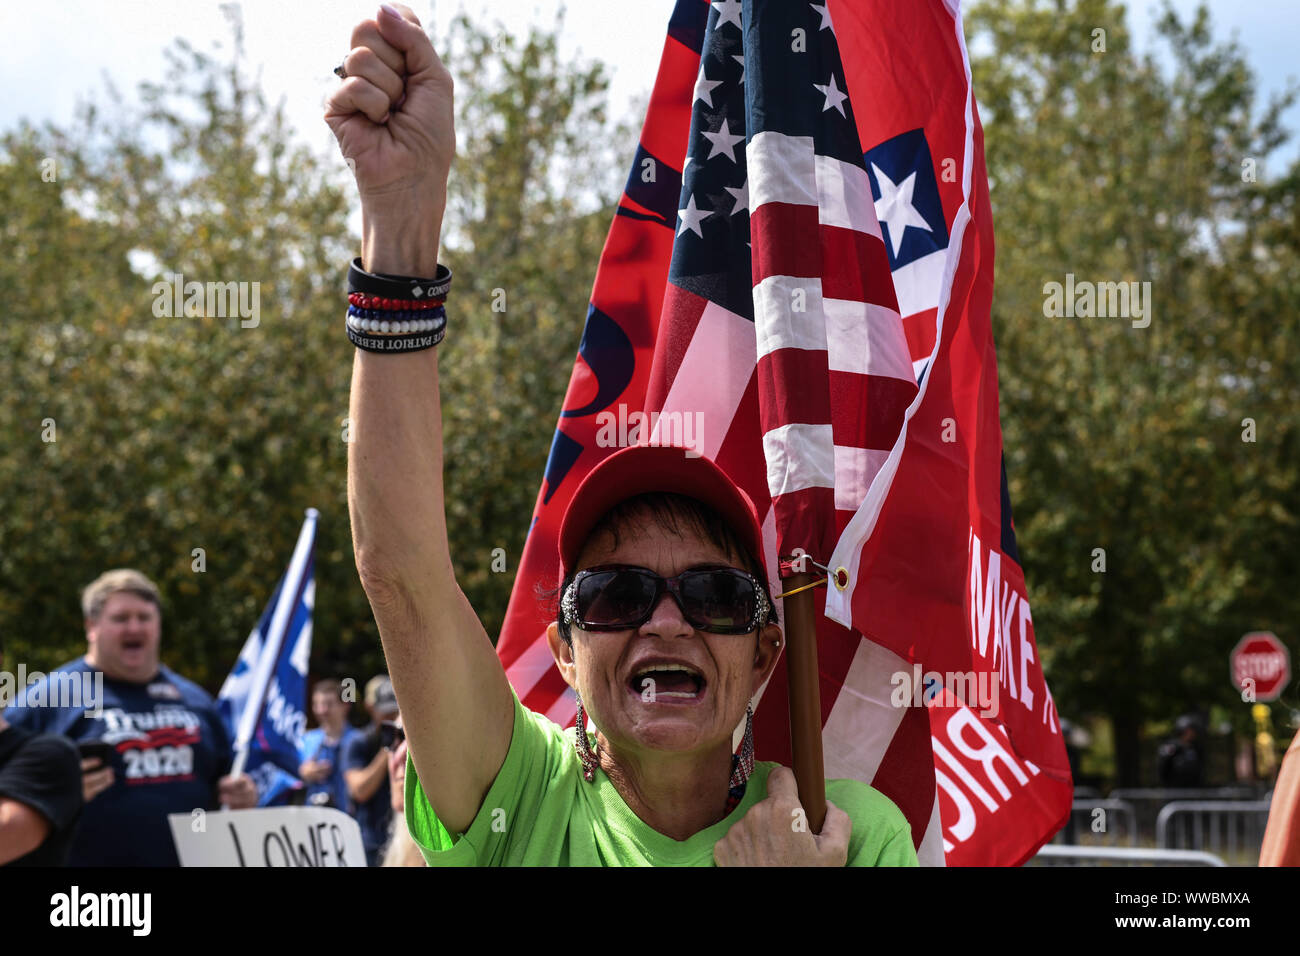 Dahlonega, Georgia, USA. 14th Sep, 2019. A woman waves an American flag and a pro-Trump flag as she says the Pledge of Allegiance during a rally organized by longtime white nationalist leader Chester Doles in Dahlonega, Georgia on Saturday. Doles billed the event as an 'American Patriot Rally'' to honor Trump and many of those who attended bore swastika tattoos and other symbols of white supremacy. Hundreds of law enforcement officers outnumbered the rally participants and counter protesters. Credit: Miguel Juarez Lugo/ZUMA Wire/Alamy Live News Stock Photo